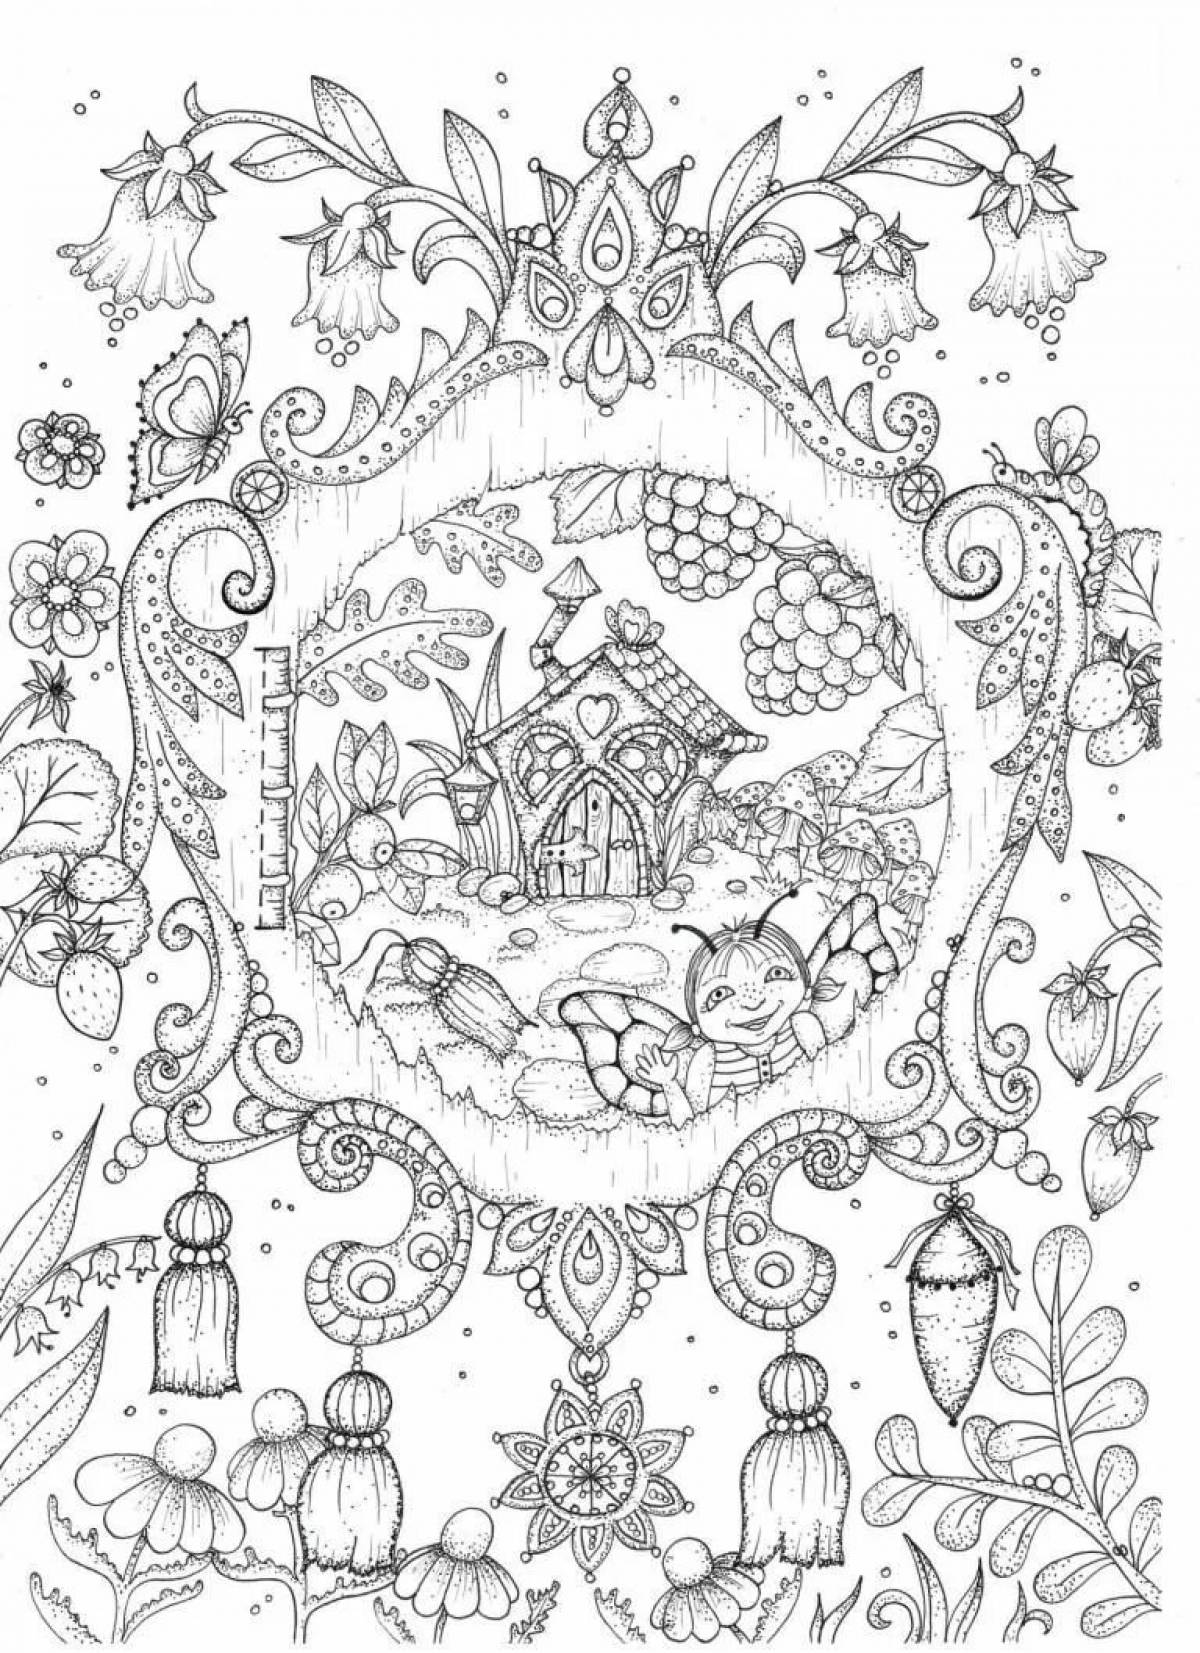 Clara's brand coloring page